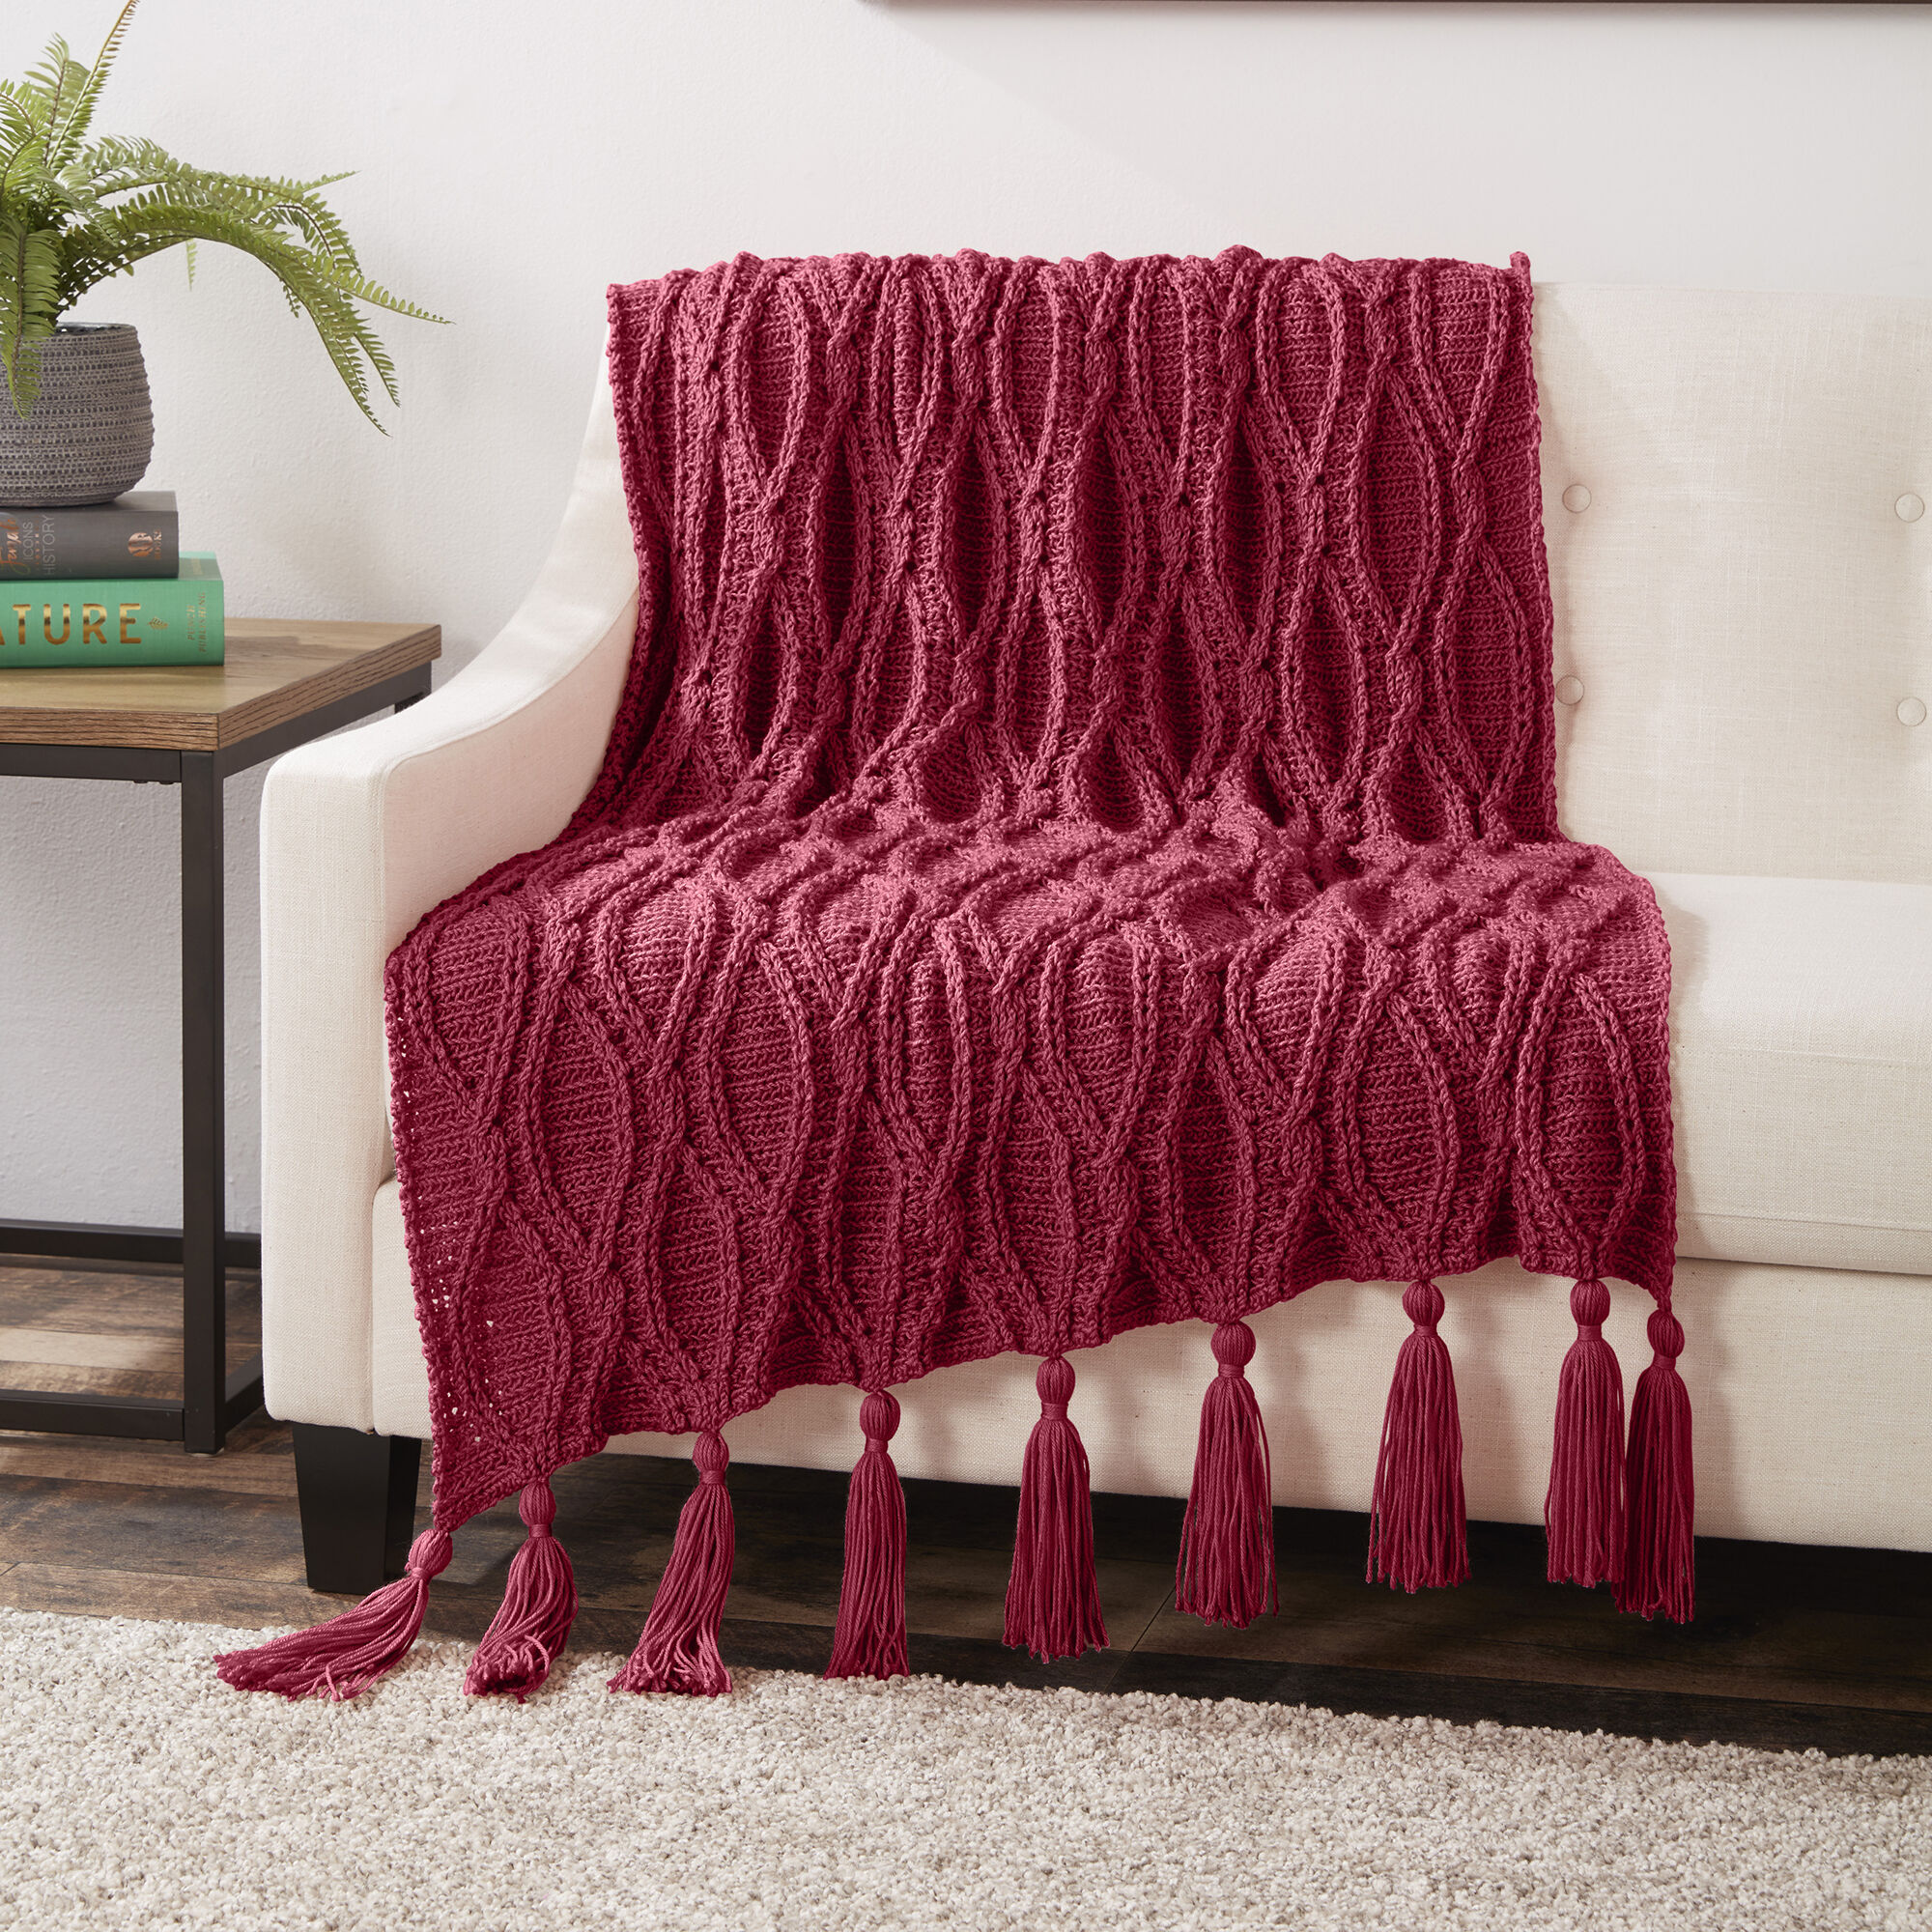 Free Crochet Pattern for a Cables Blanket